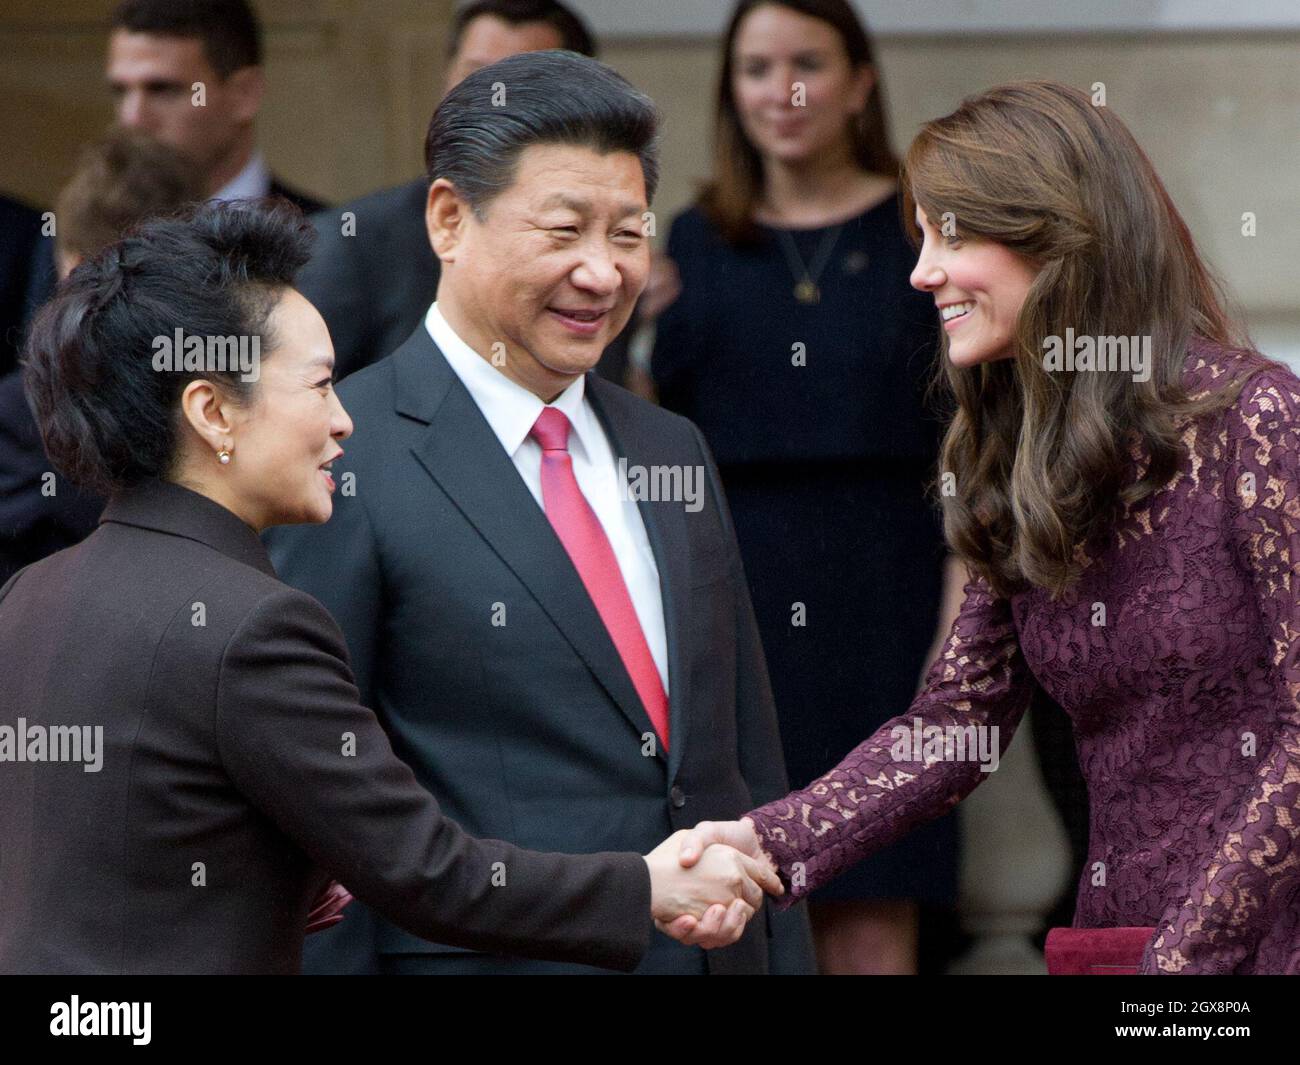 Catherine, Duchess of Cambridge greets President of China Mr Xi Jinping and Madame Peng Liyuan at a creative industry event at Lancaster House in London on October 21, 2015.    Stock Photo